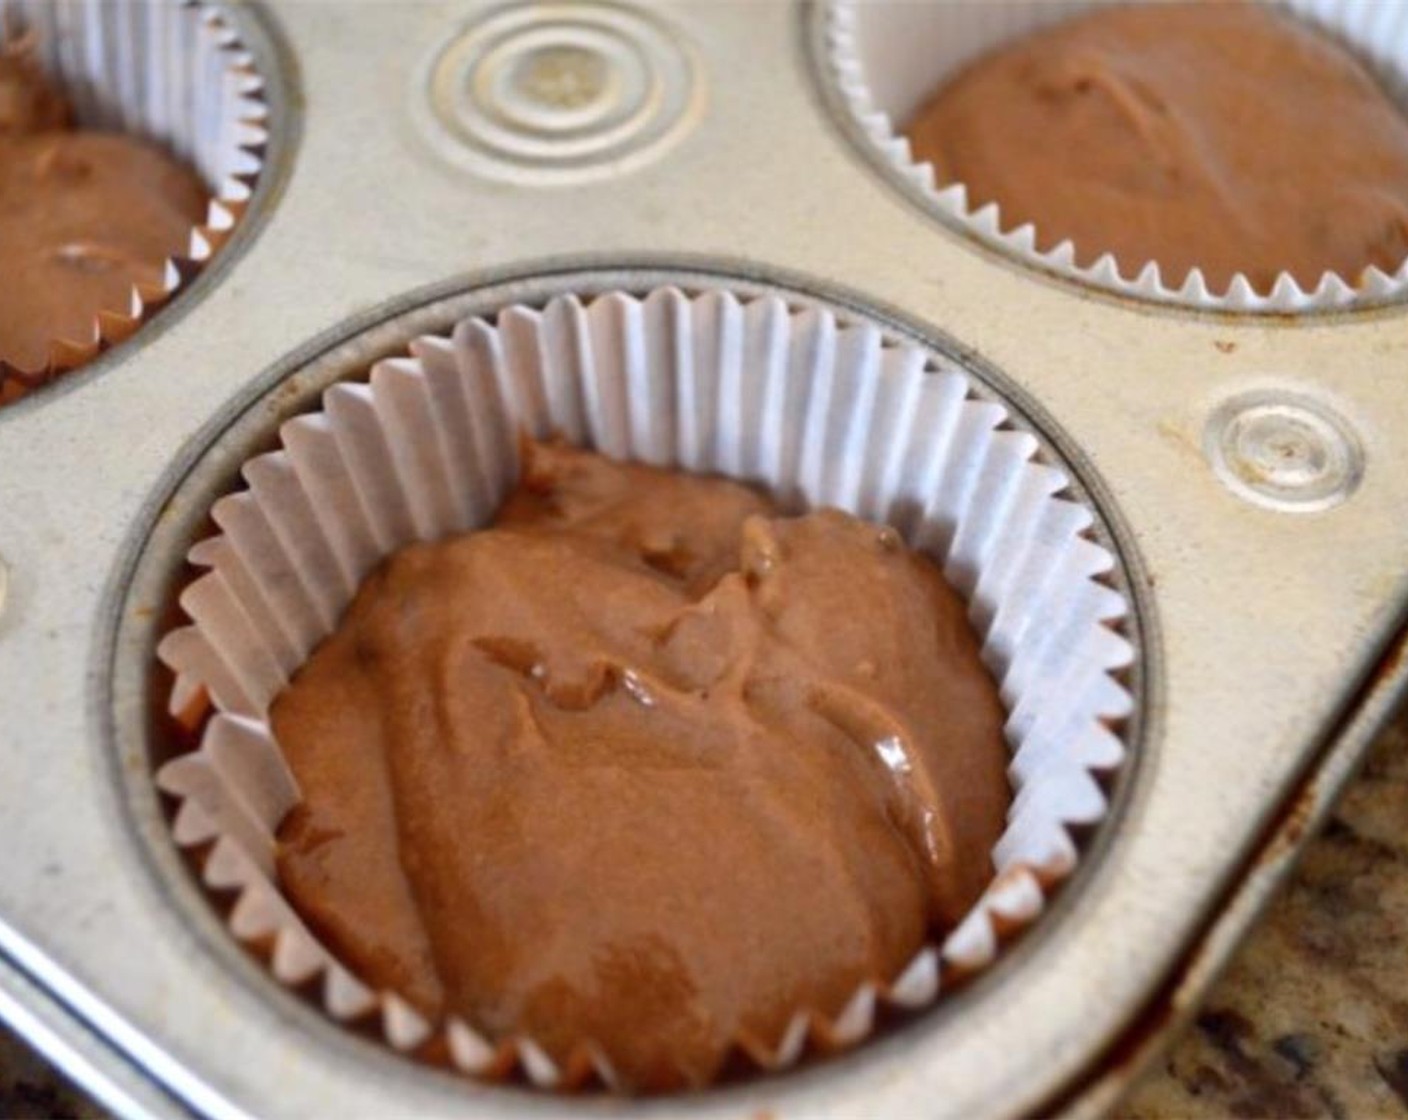 step 6 Use a 1.5 inch cookie scoop to distribute two scoops of the batter into each lined muffin well.